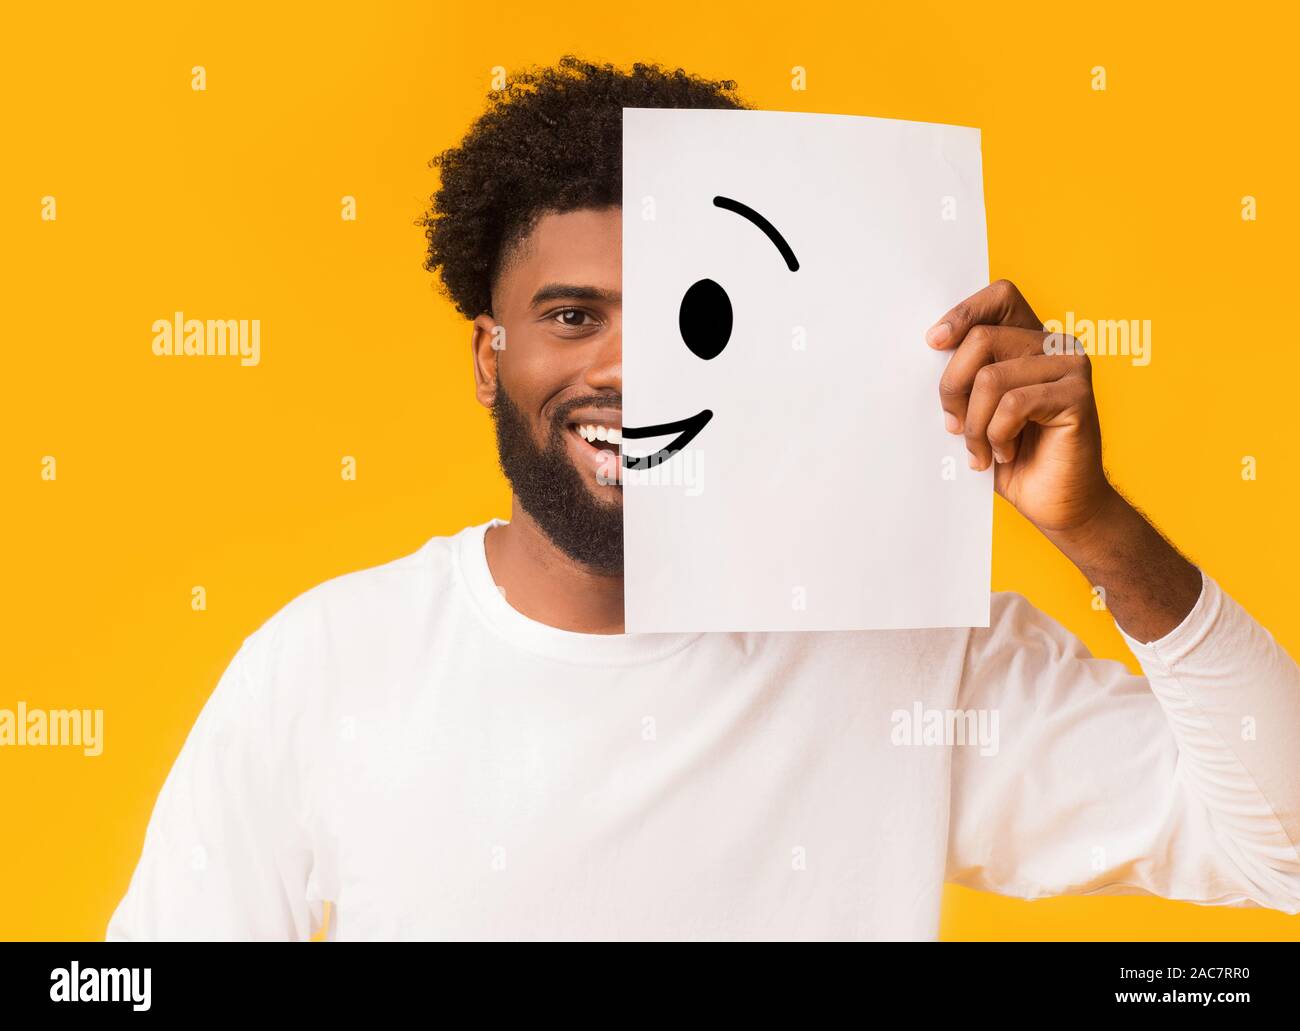 Black cheerful man covering half face with smiley picture Stock Photo